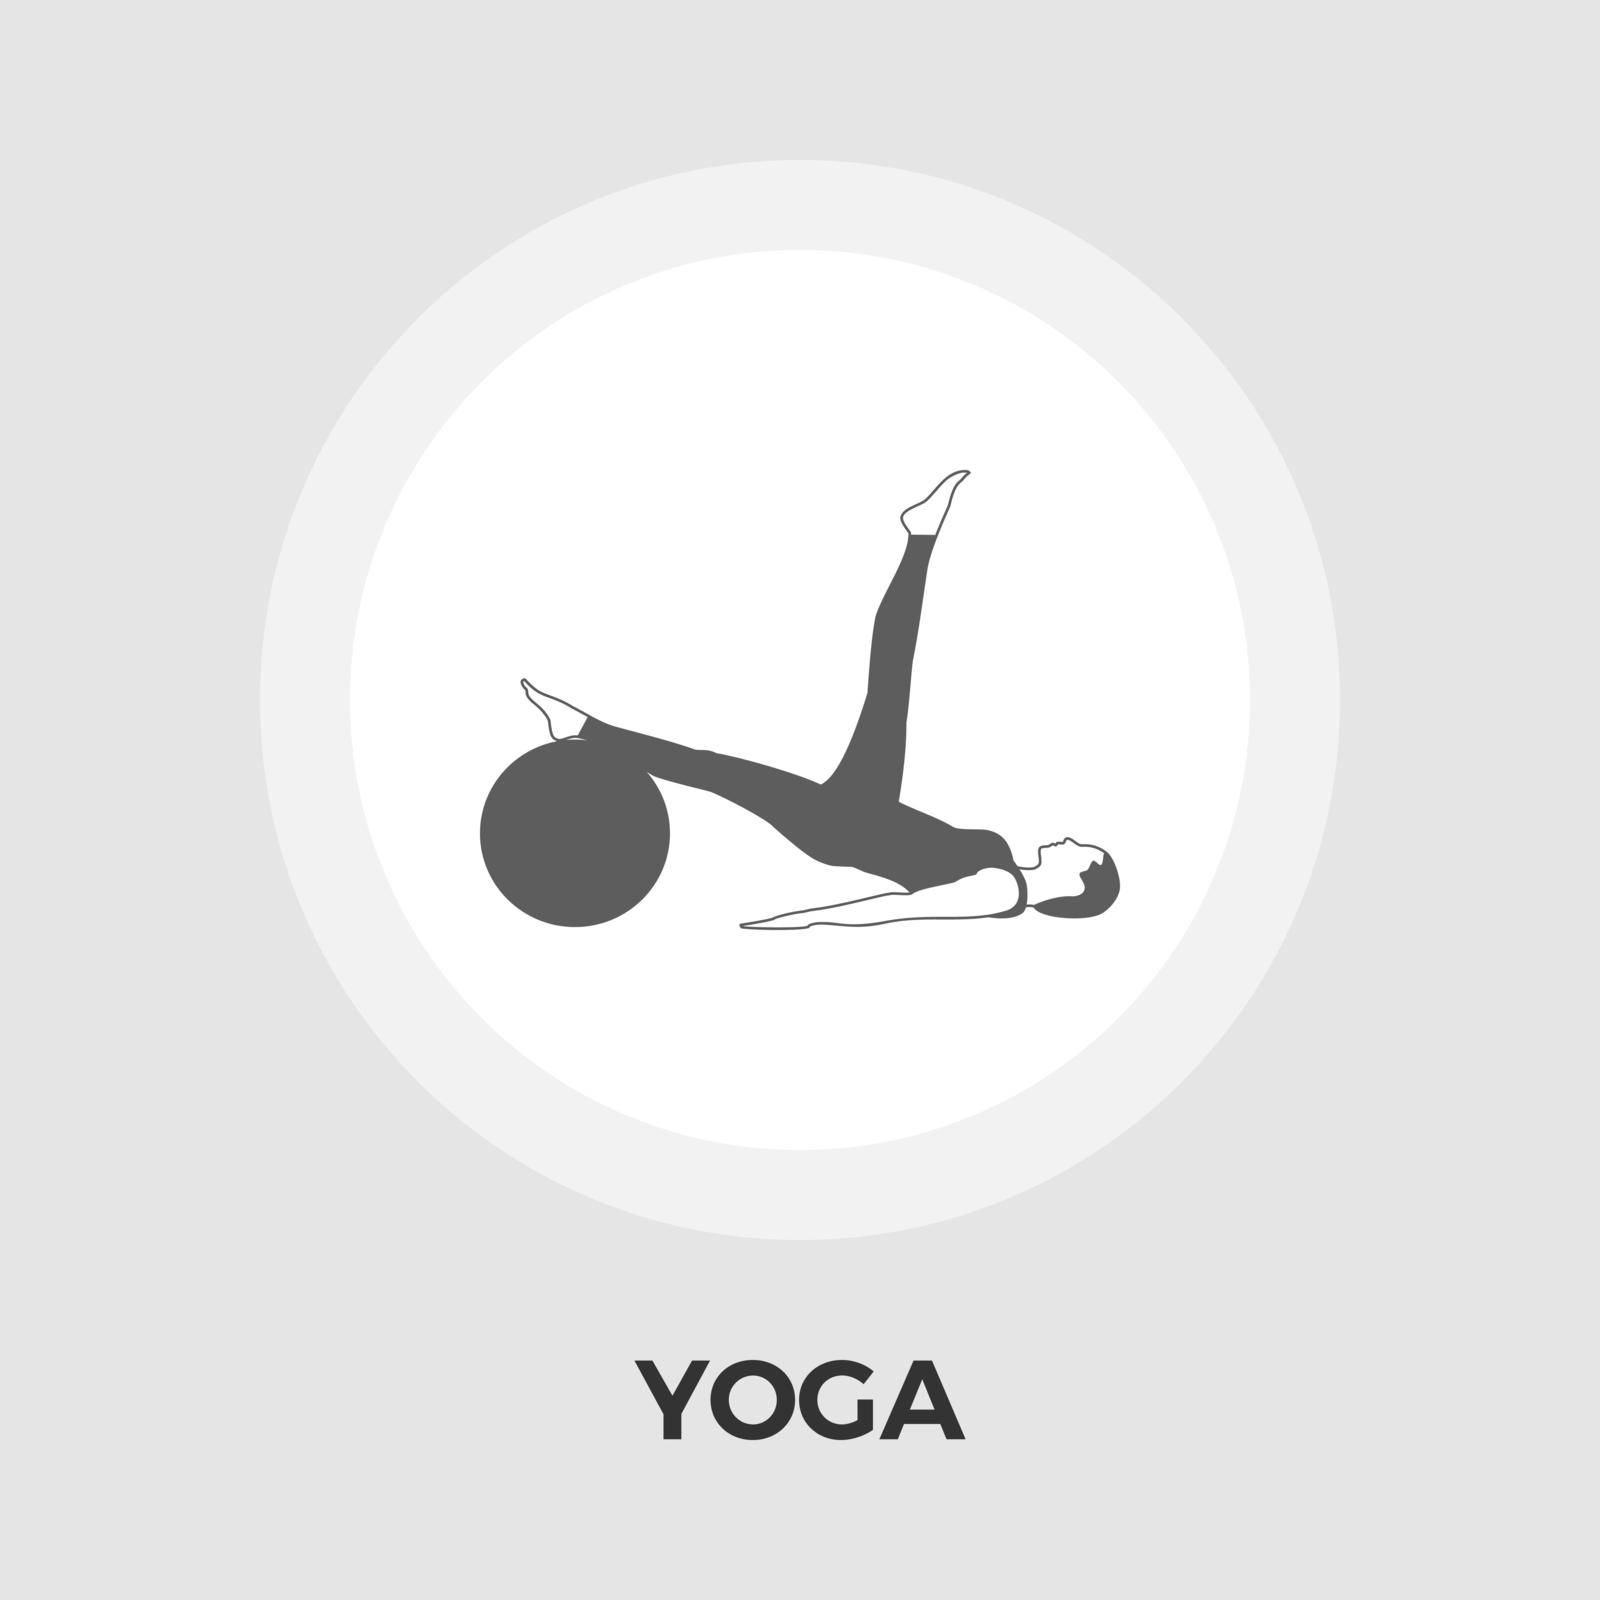 Yoga icon vector. Flat icon isolated on the white background. Editable EPS file. Vector illustration.